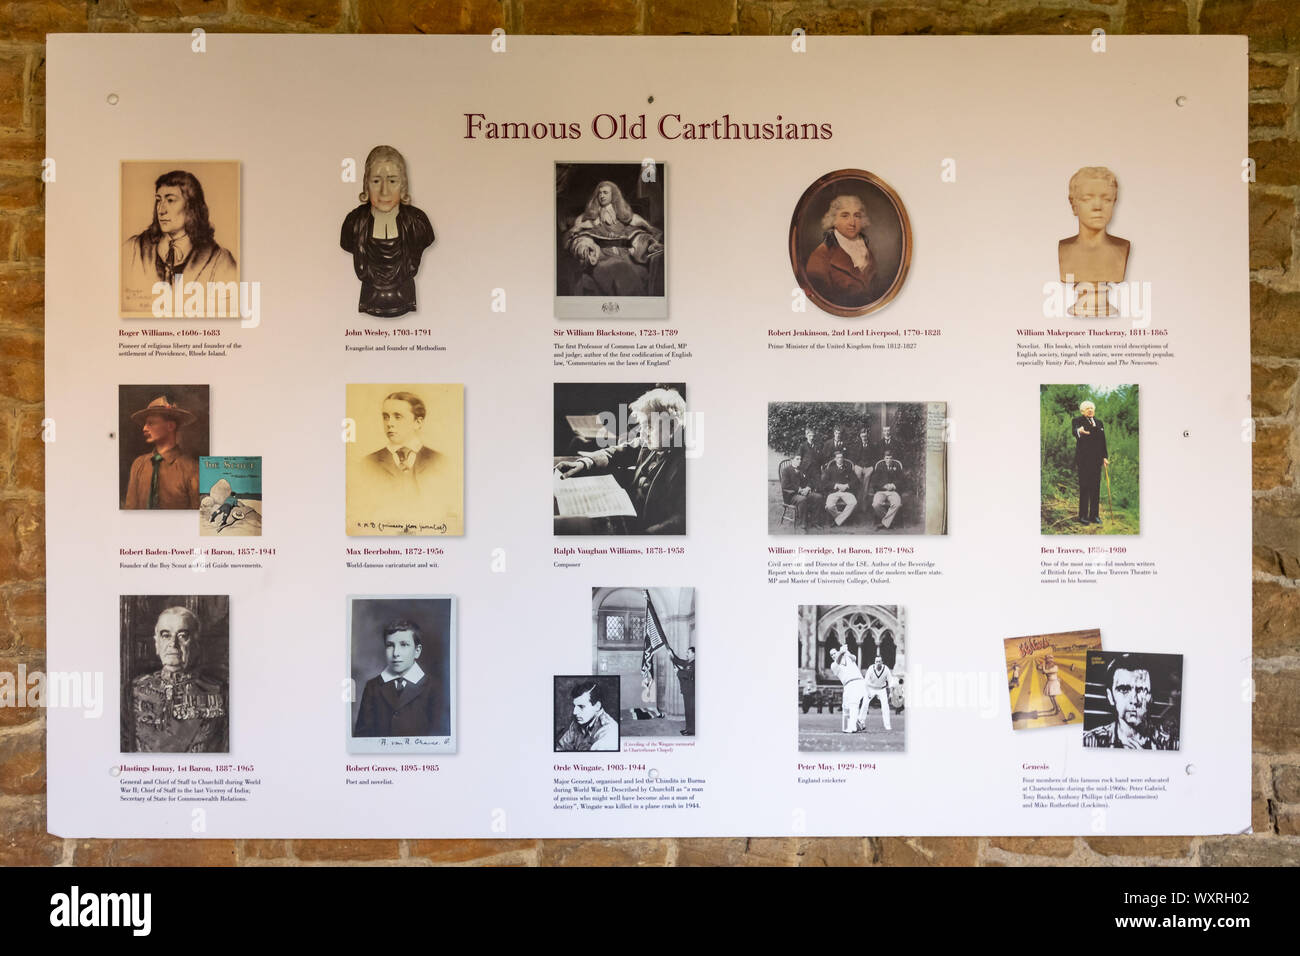 Charterhouse School, a historic boarding school in Surrey, UK. Information board about famous Old Carthusians (old school pupils) Stock Photo